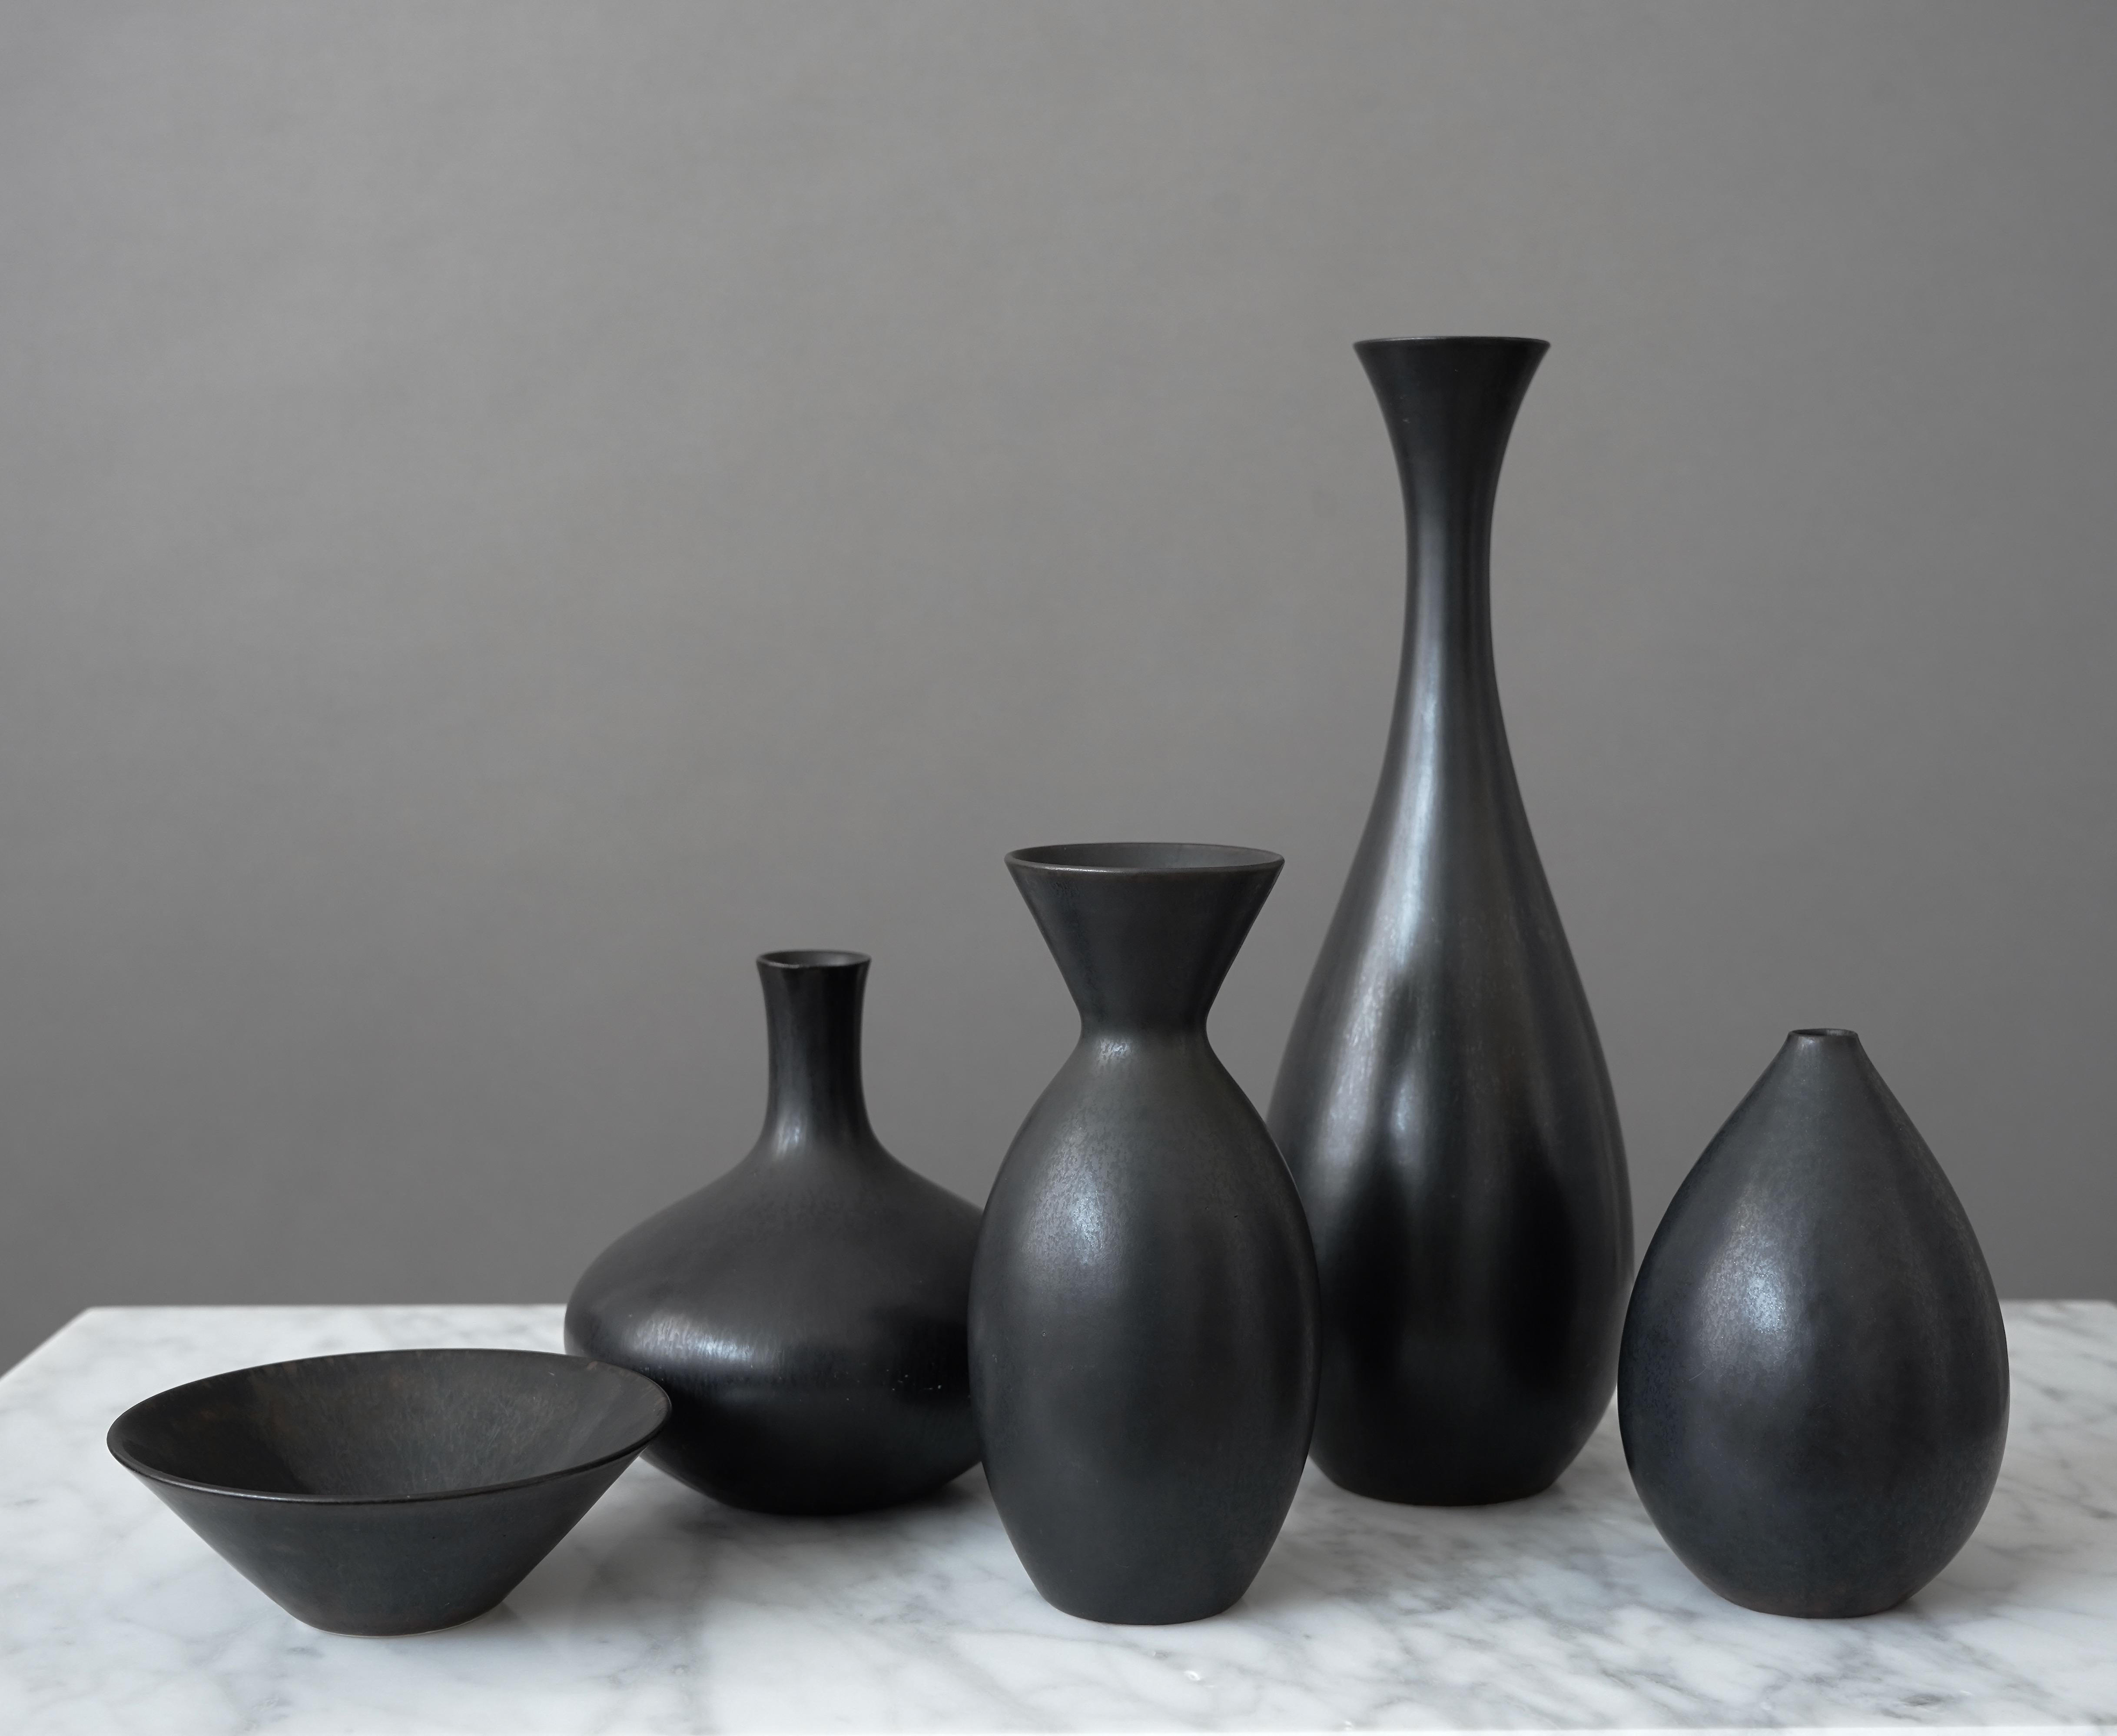 20th Century Set of 5 Black Stoneware Vases by Carl-Harry Stalhane, Rorstrand, Sweden, 1950s For Sale